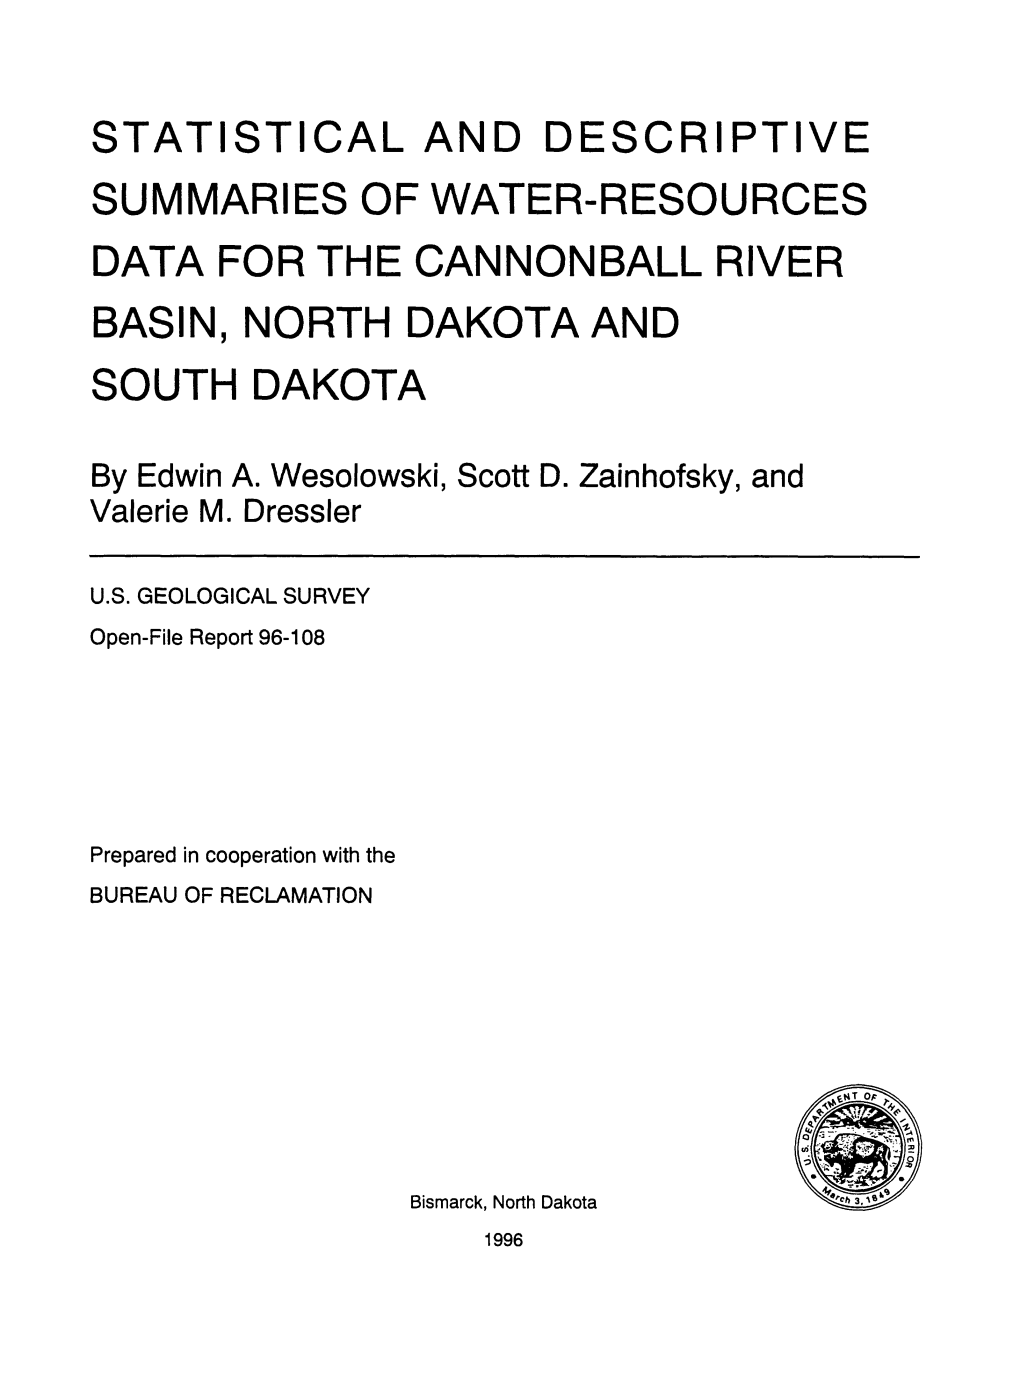 Statistical and Descriptive Summaries of Water-Resources Data for the Cannonball River Basin, North Dakota and South Dakota